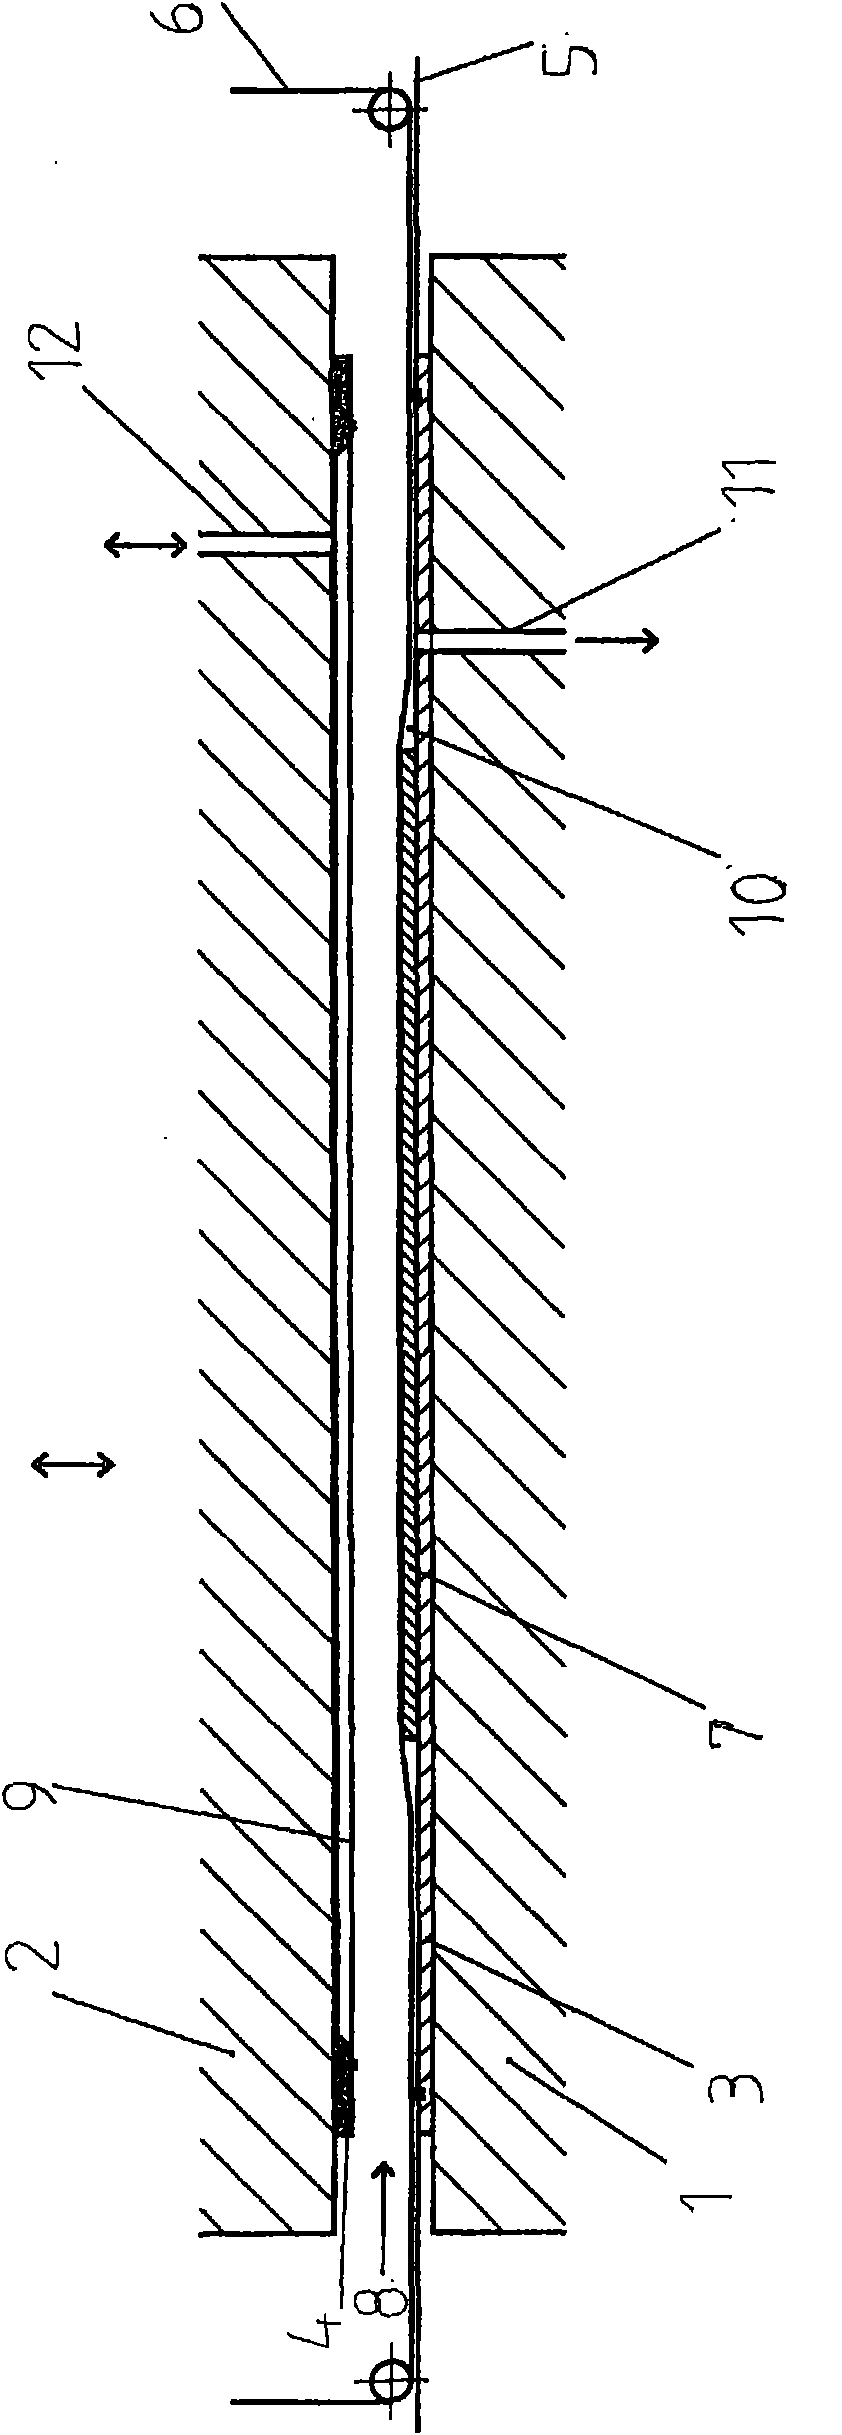 Method and device for laminating mainly plate-shaped workpieces with the use of pressure and heat